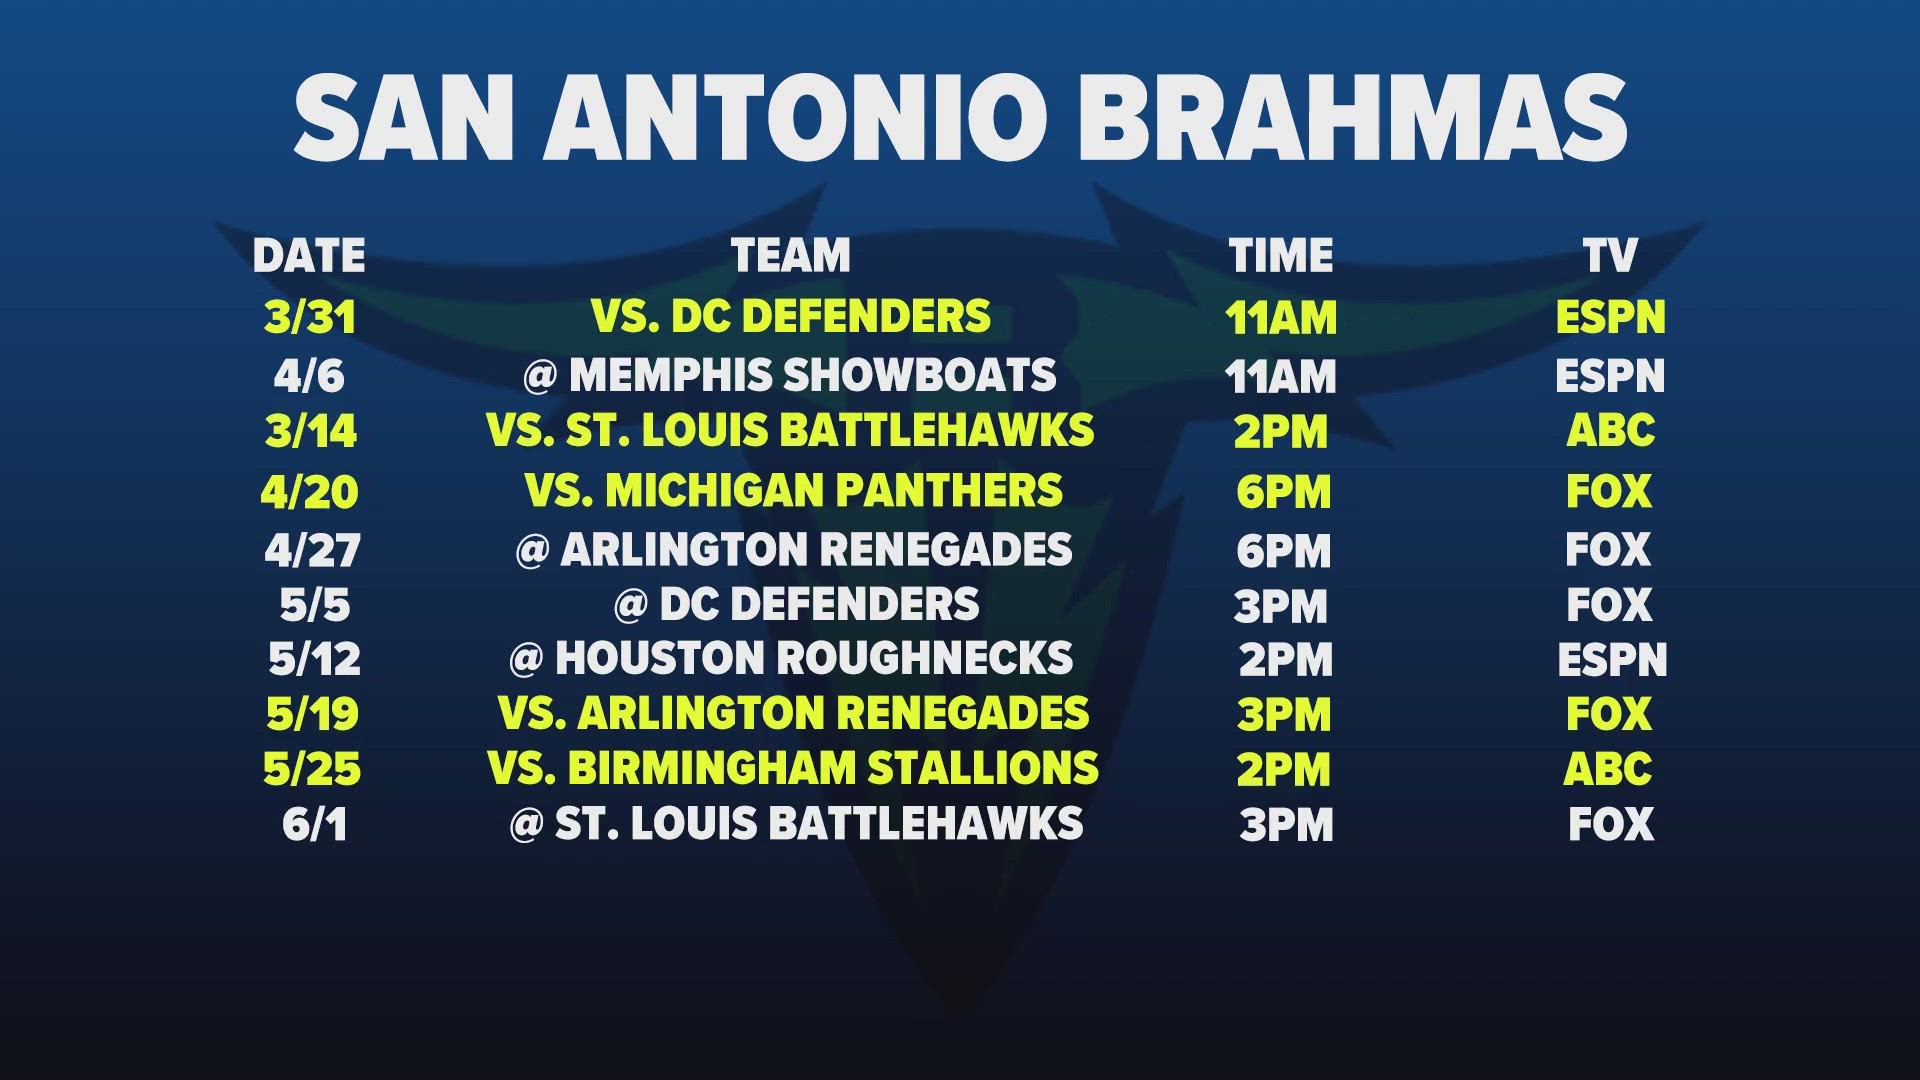 The schedule included five home contests at the Alamodome.